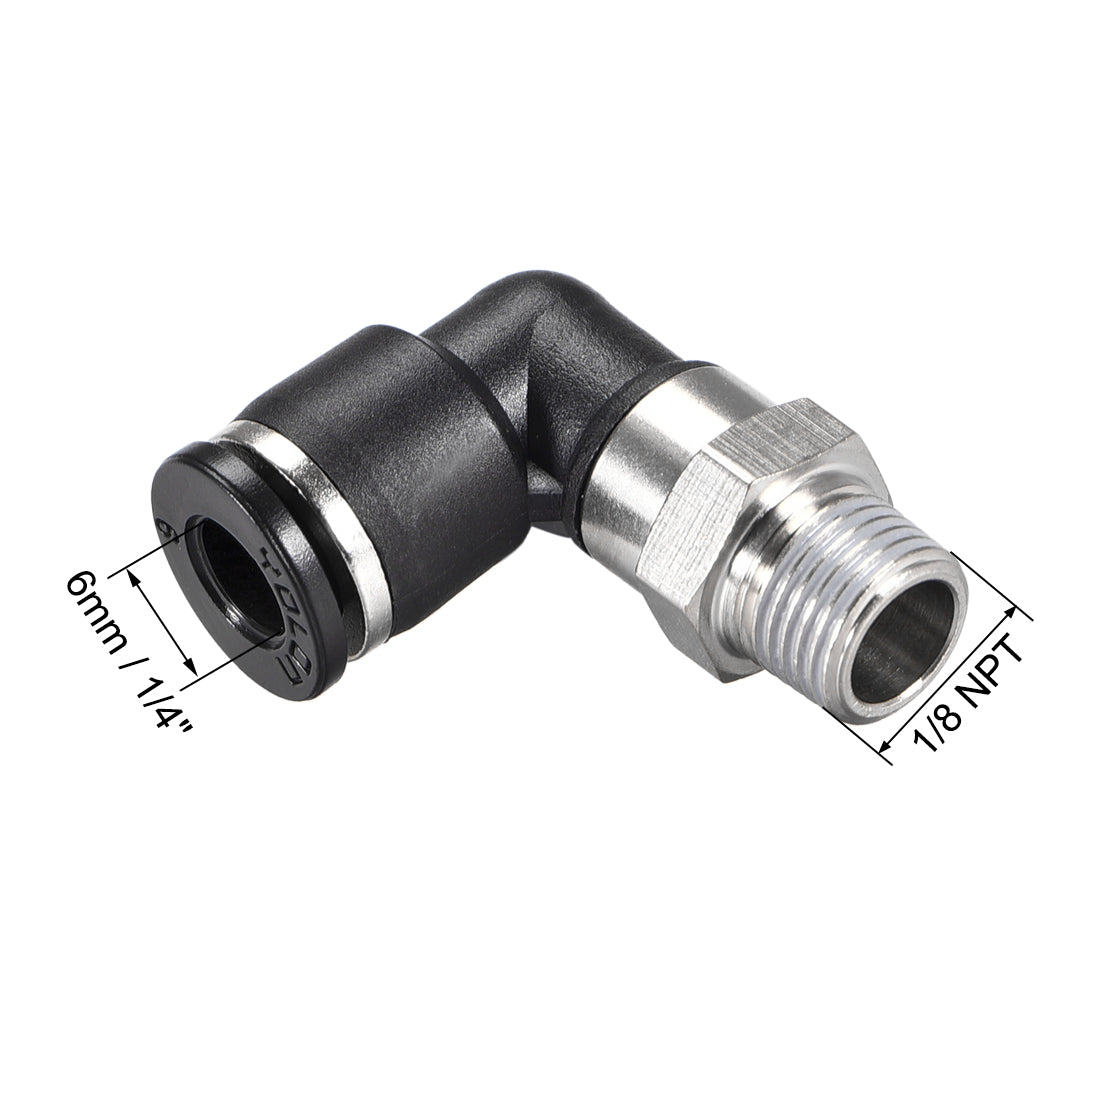 uxcell Uxcell Push to Connect Tube Fitting Male Elbow 6mm Tube OD x 1/8 NPT Thread Pneumatic Air Push Fit Lock Fitting 2pcs